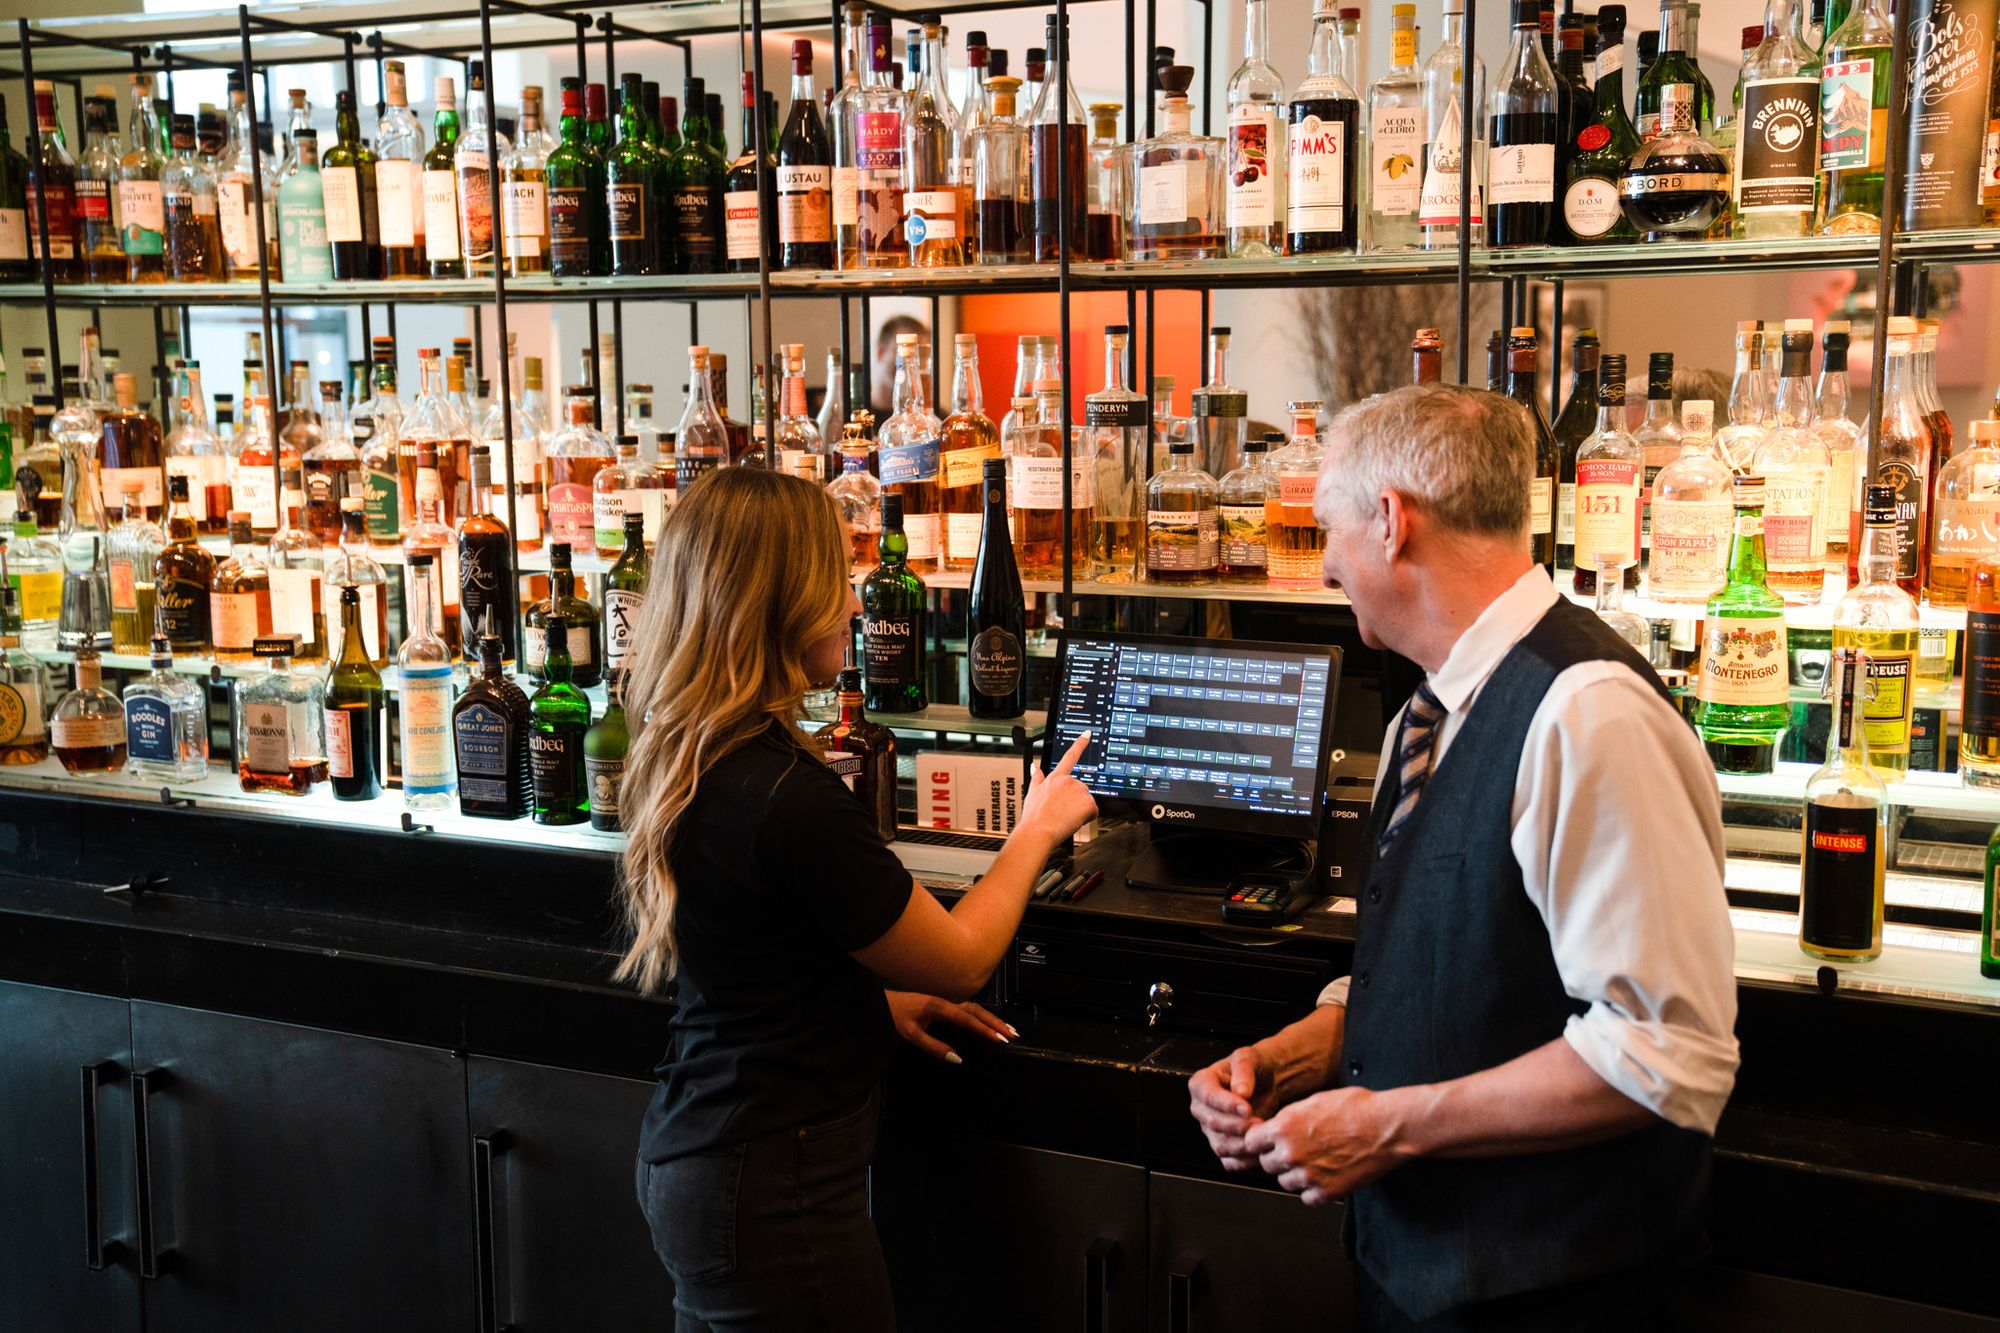 A POS representative shows a restaurant manager how to opearate the POS at their bar.